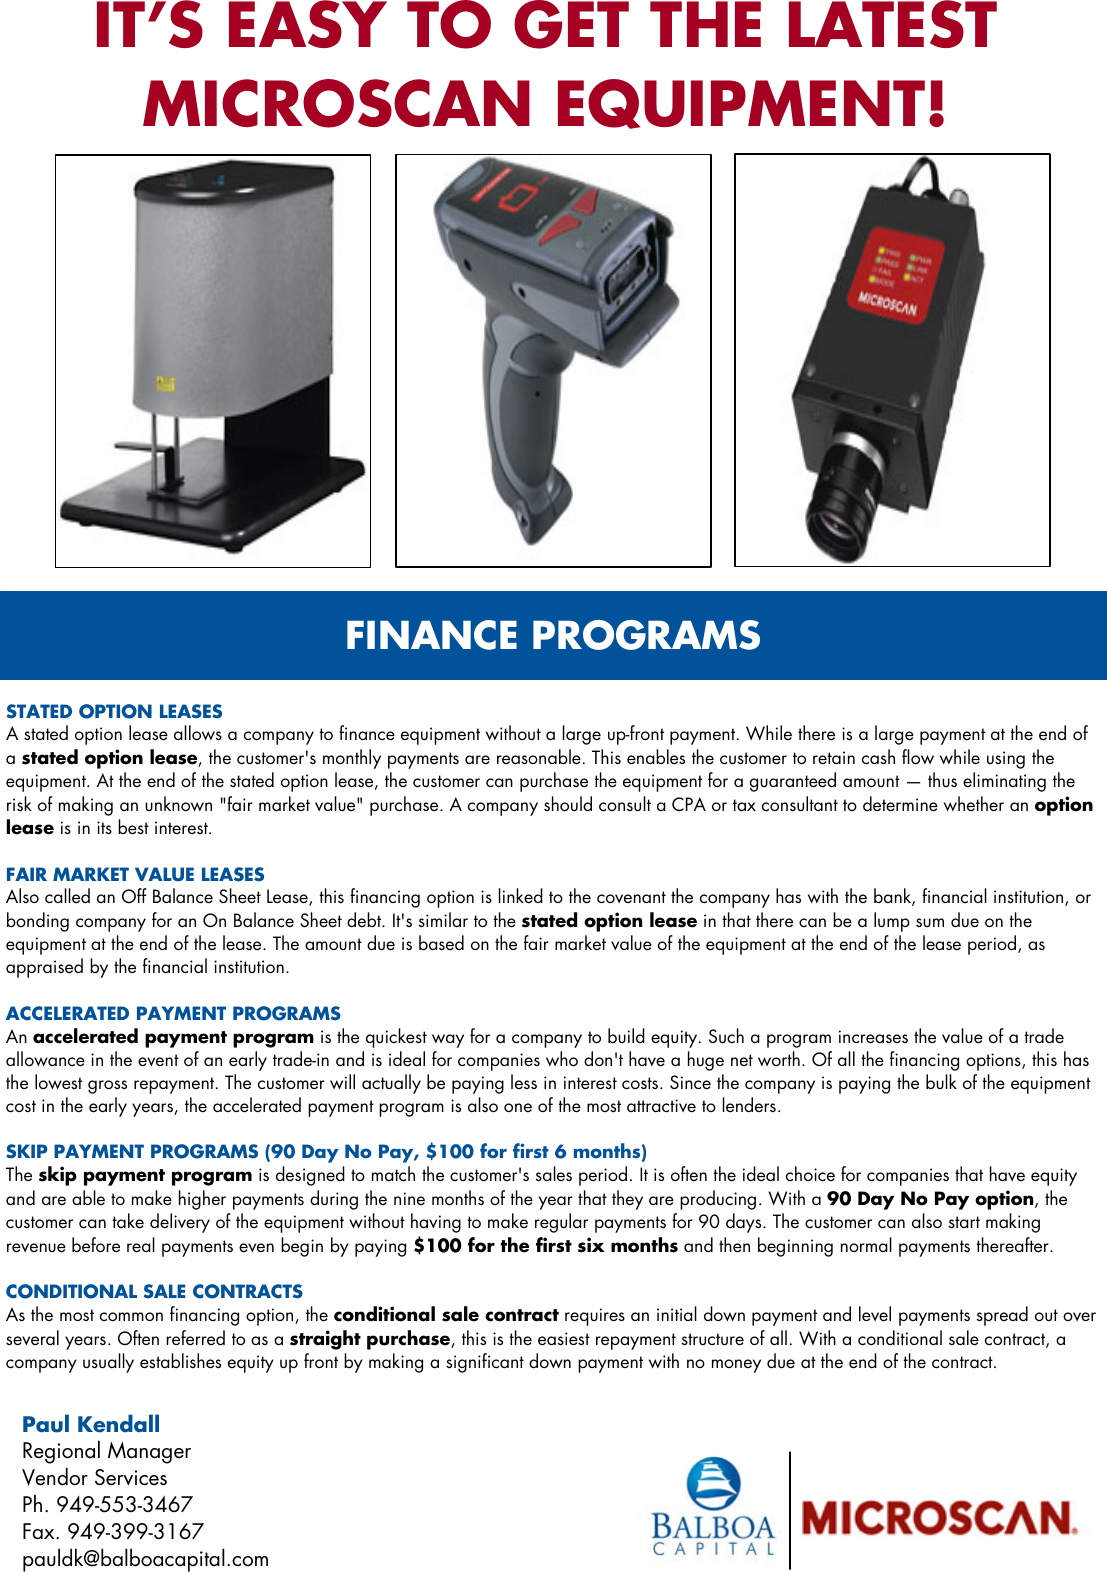 Page 1 of 1 - Microscan Financeand Leasing Programs Overview